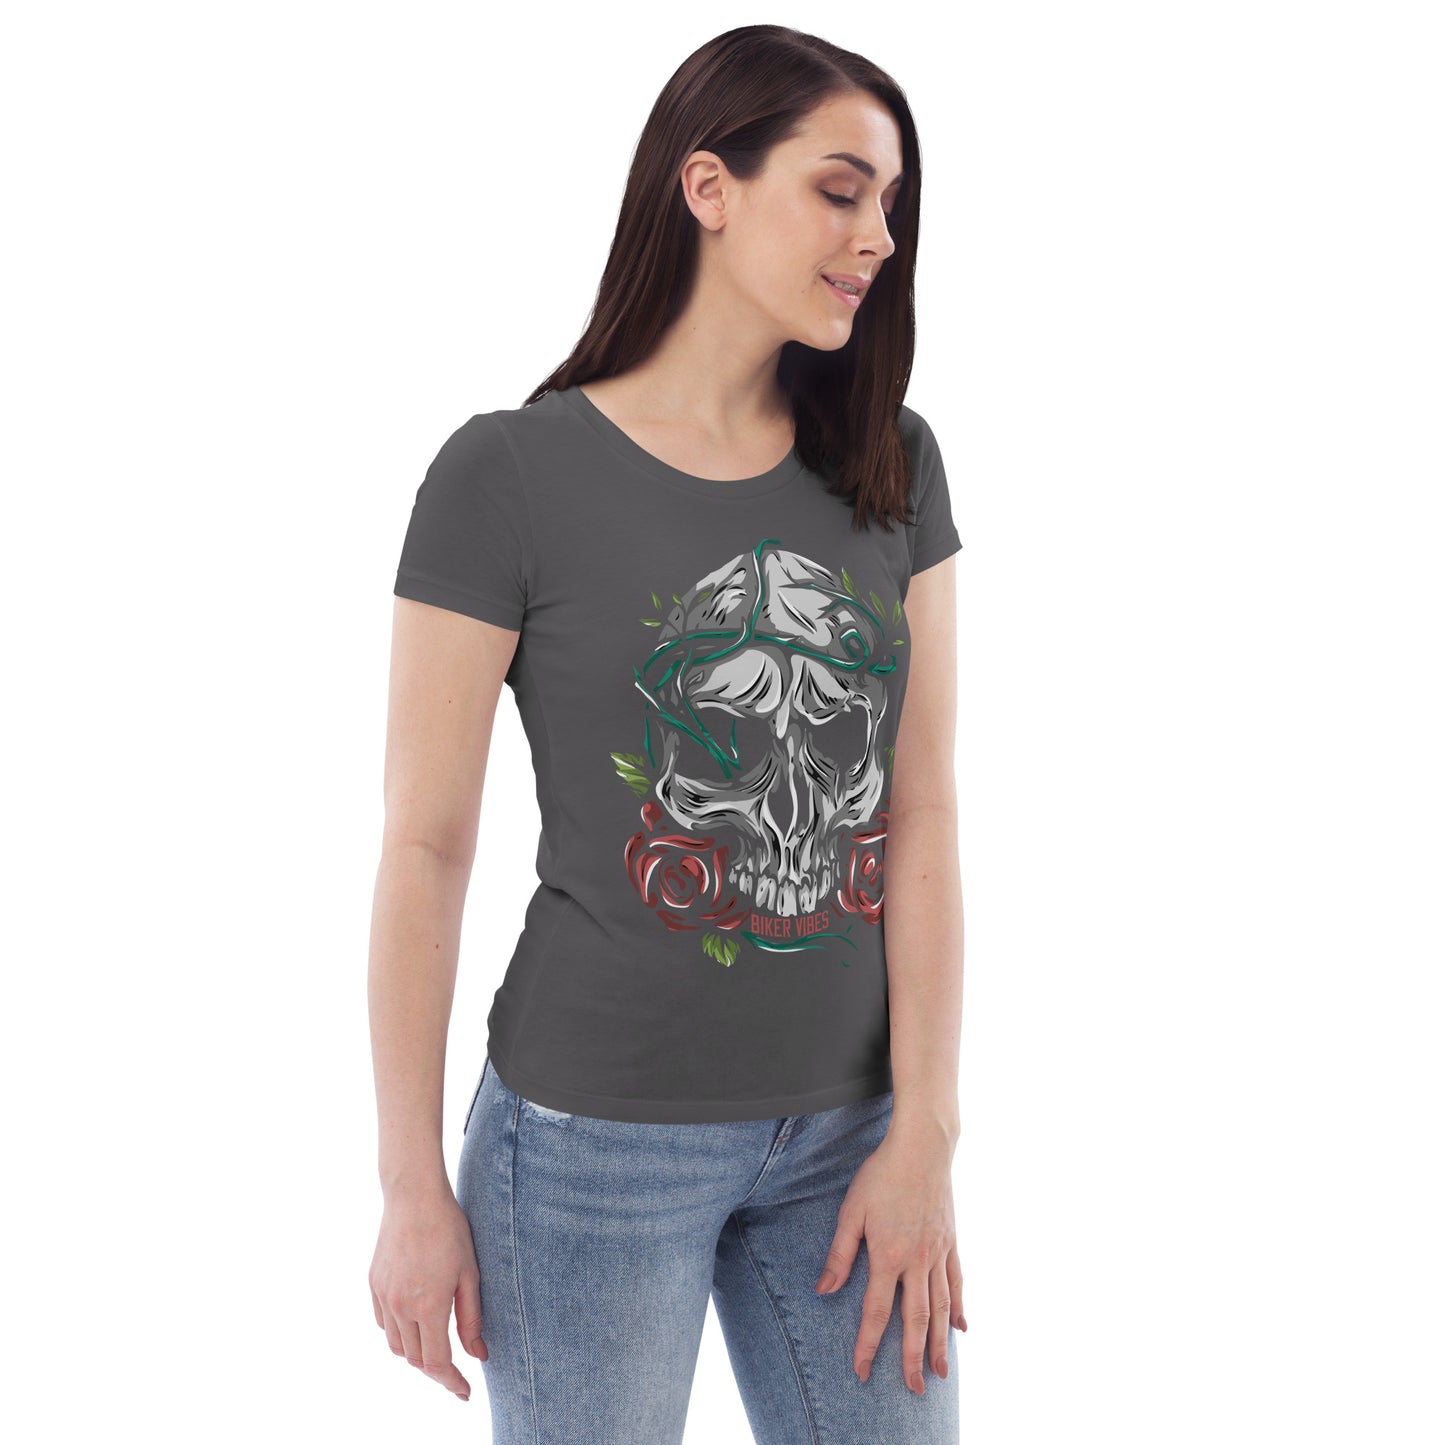 TIME OF VIBES - Women's fitted eco tee FLOWERSKULL (Grey) - €32.00